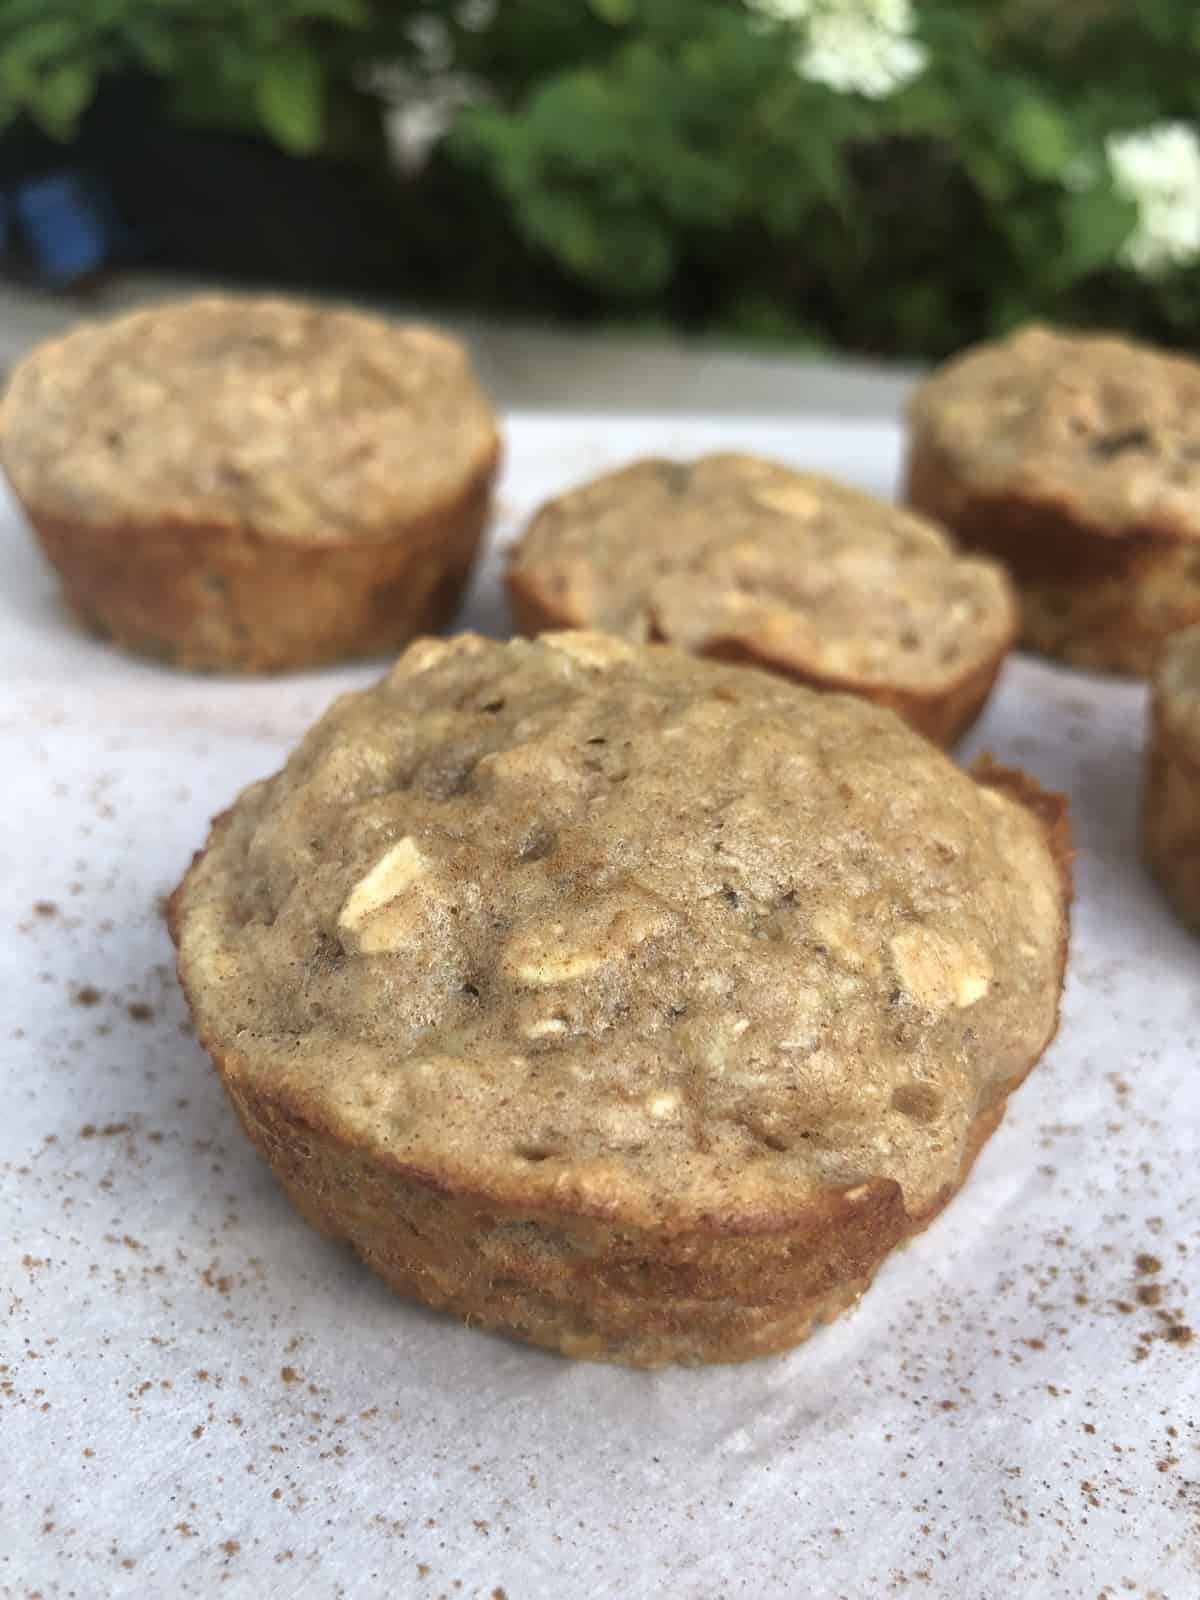  4 cinnamon oat muffins on white parchment paper